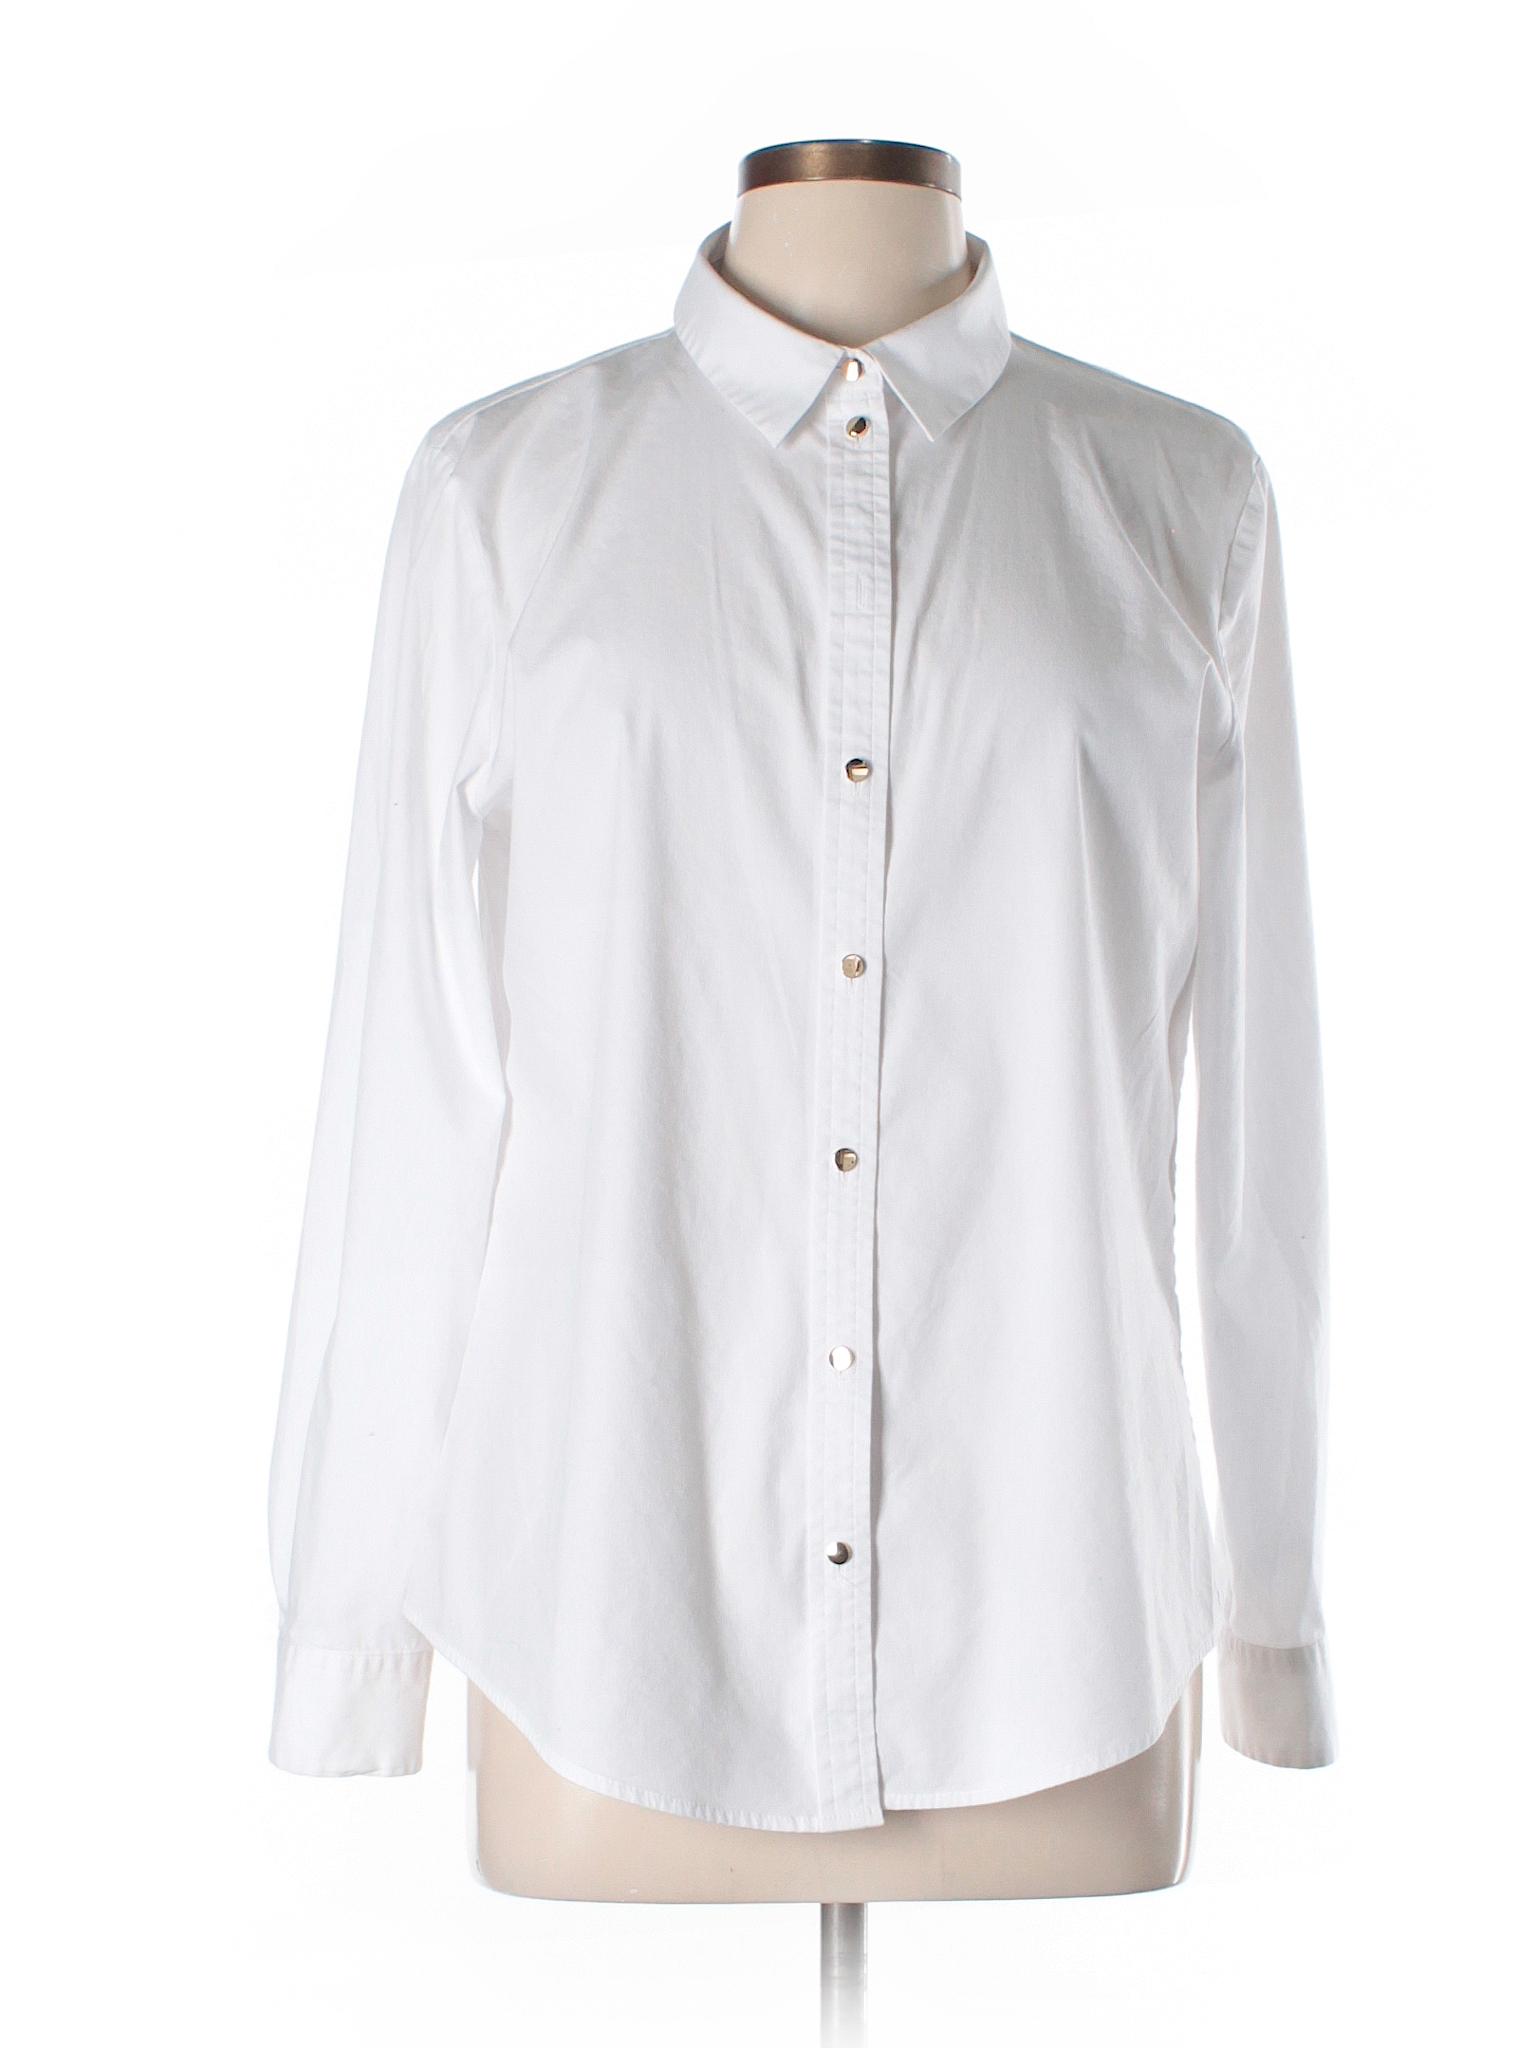 Ivanka Trump Solid White Long Sleeve Button-Down Shirt Size L - 74% off ...